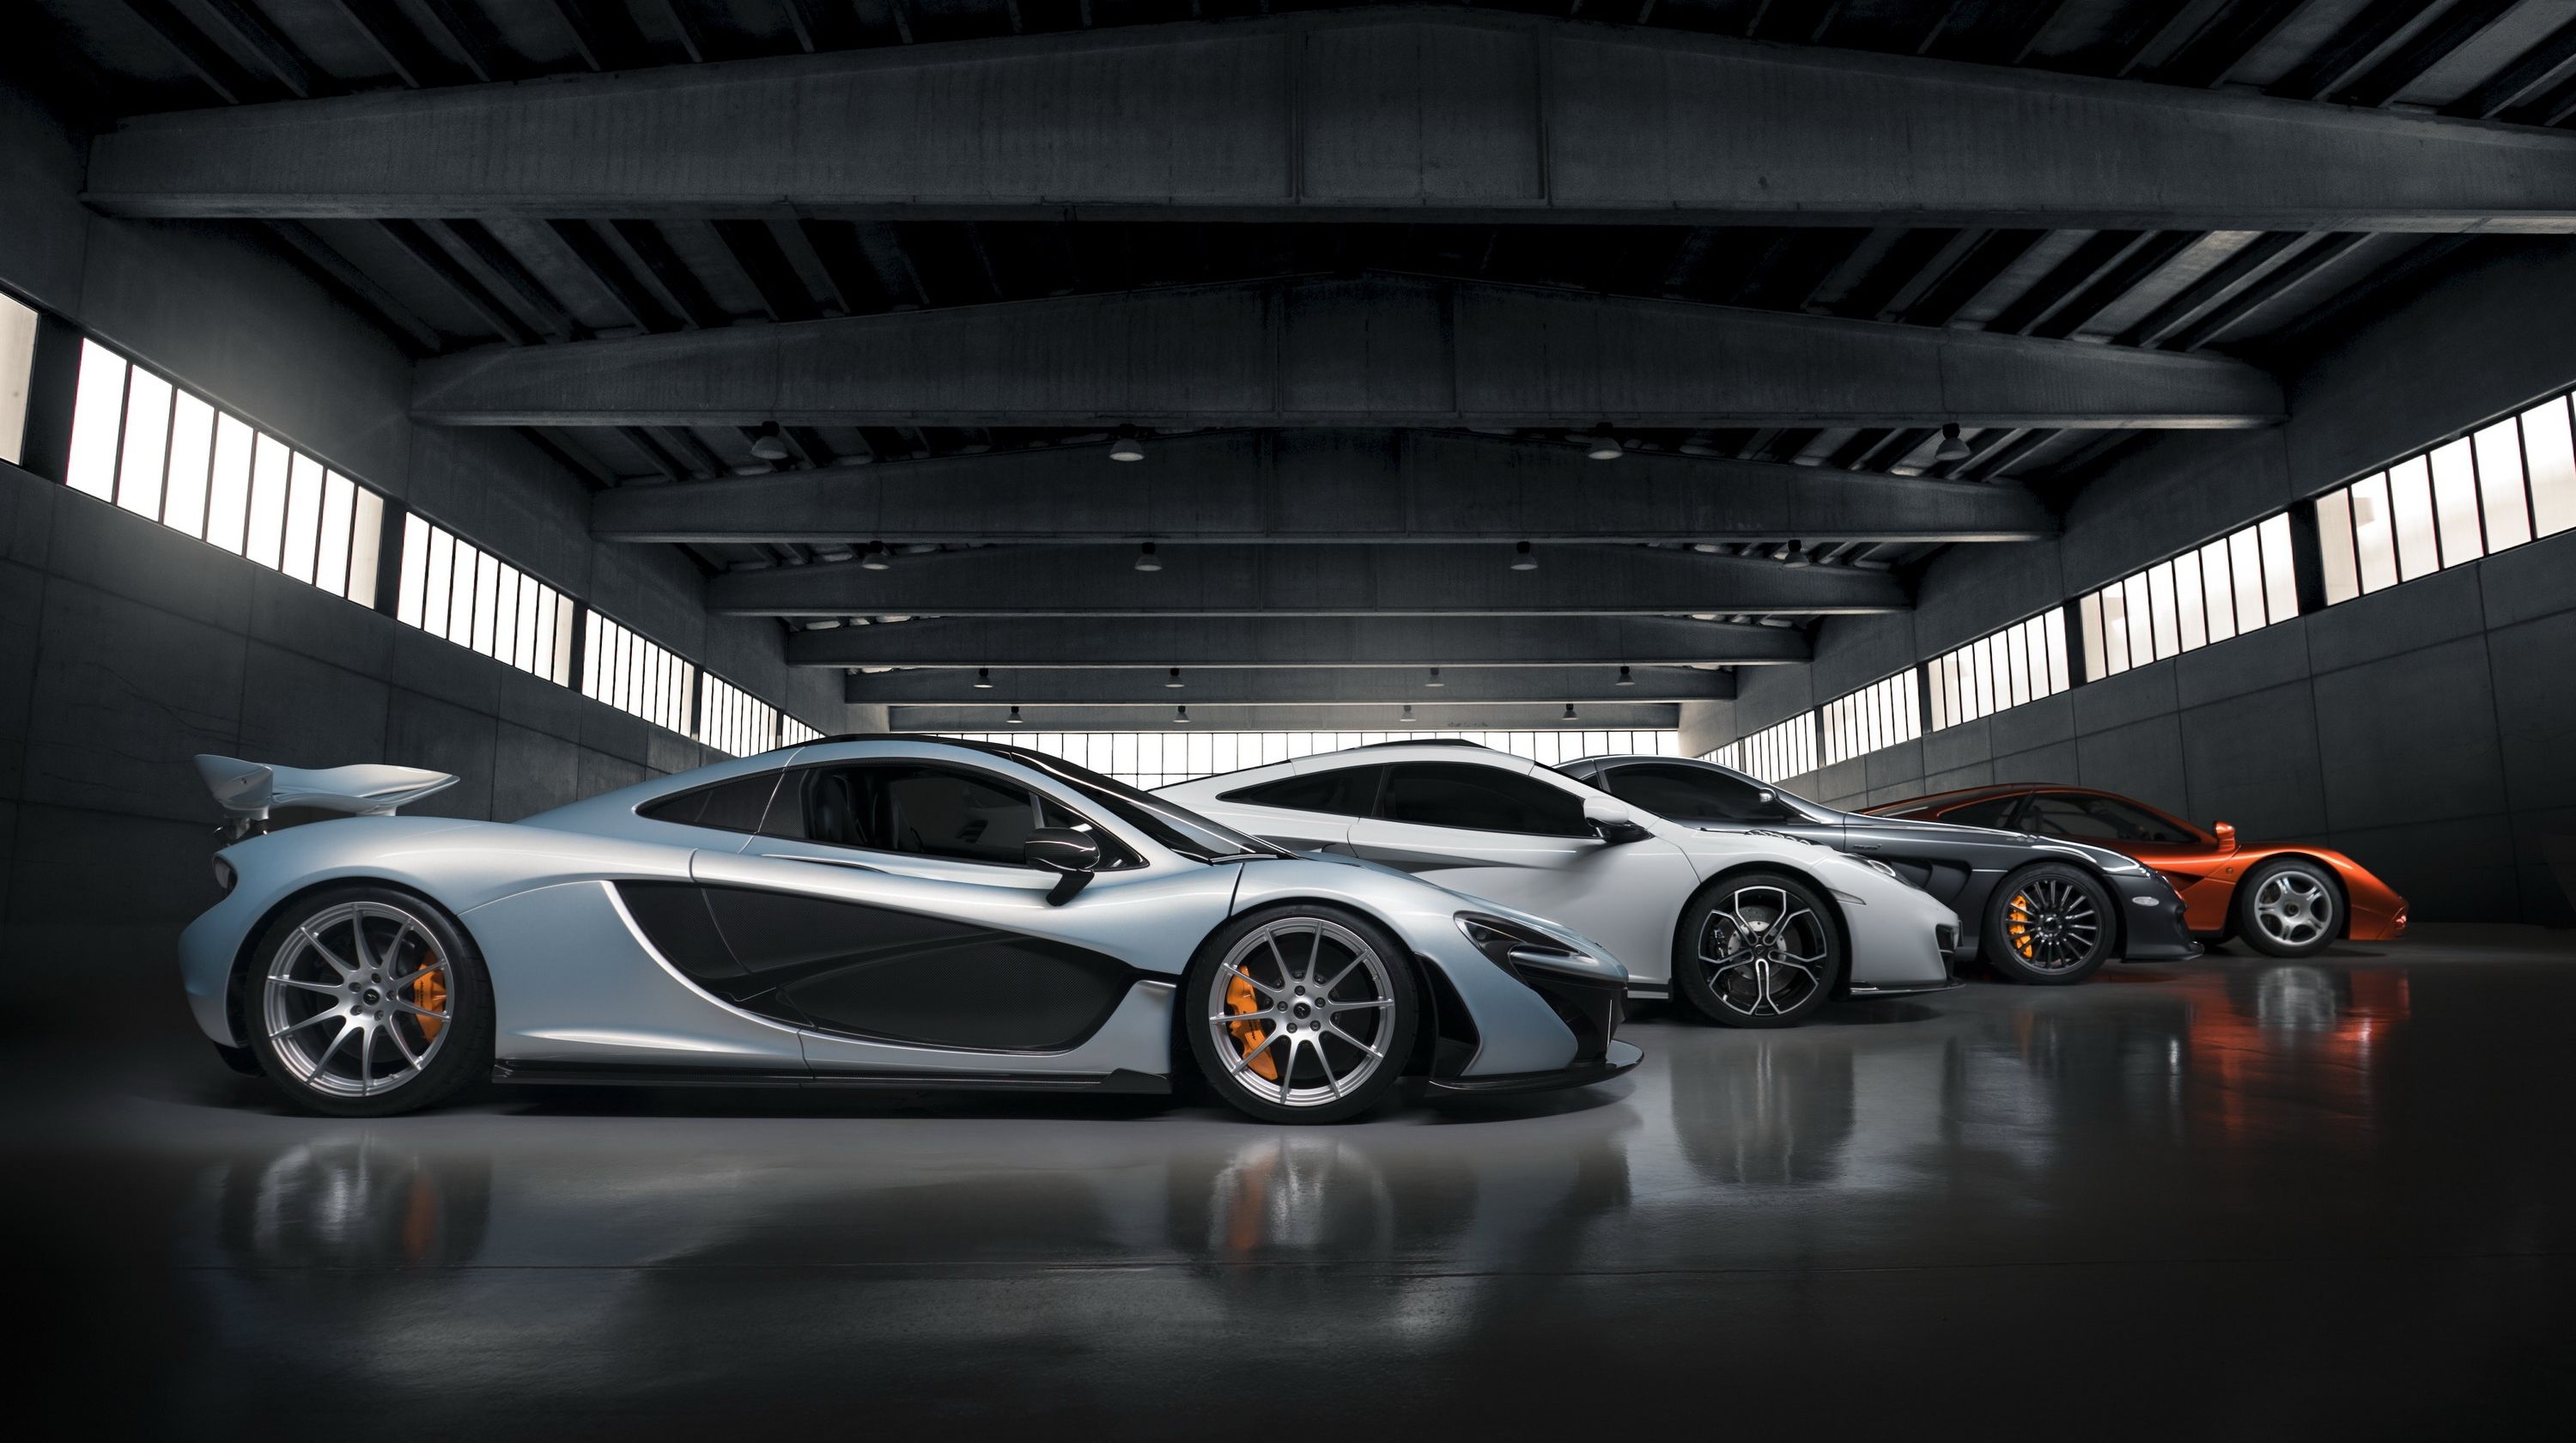  McLAren announced its MSO Defined division with this awesome 650S.